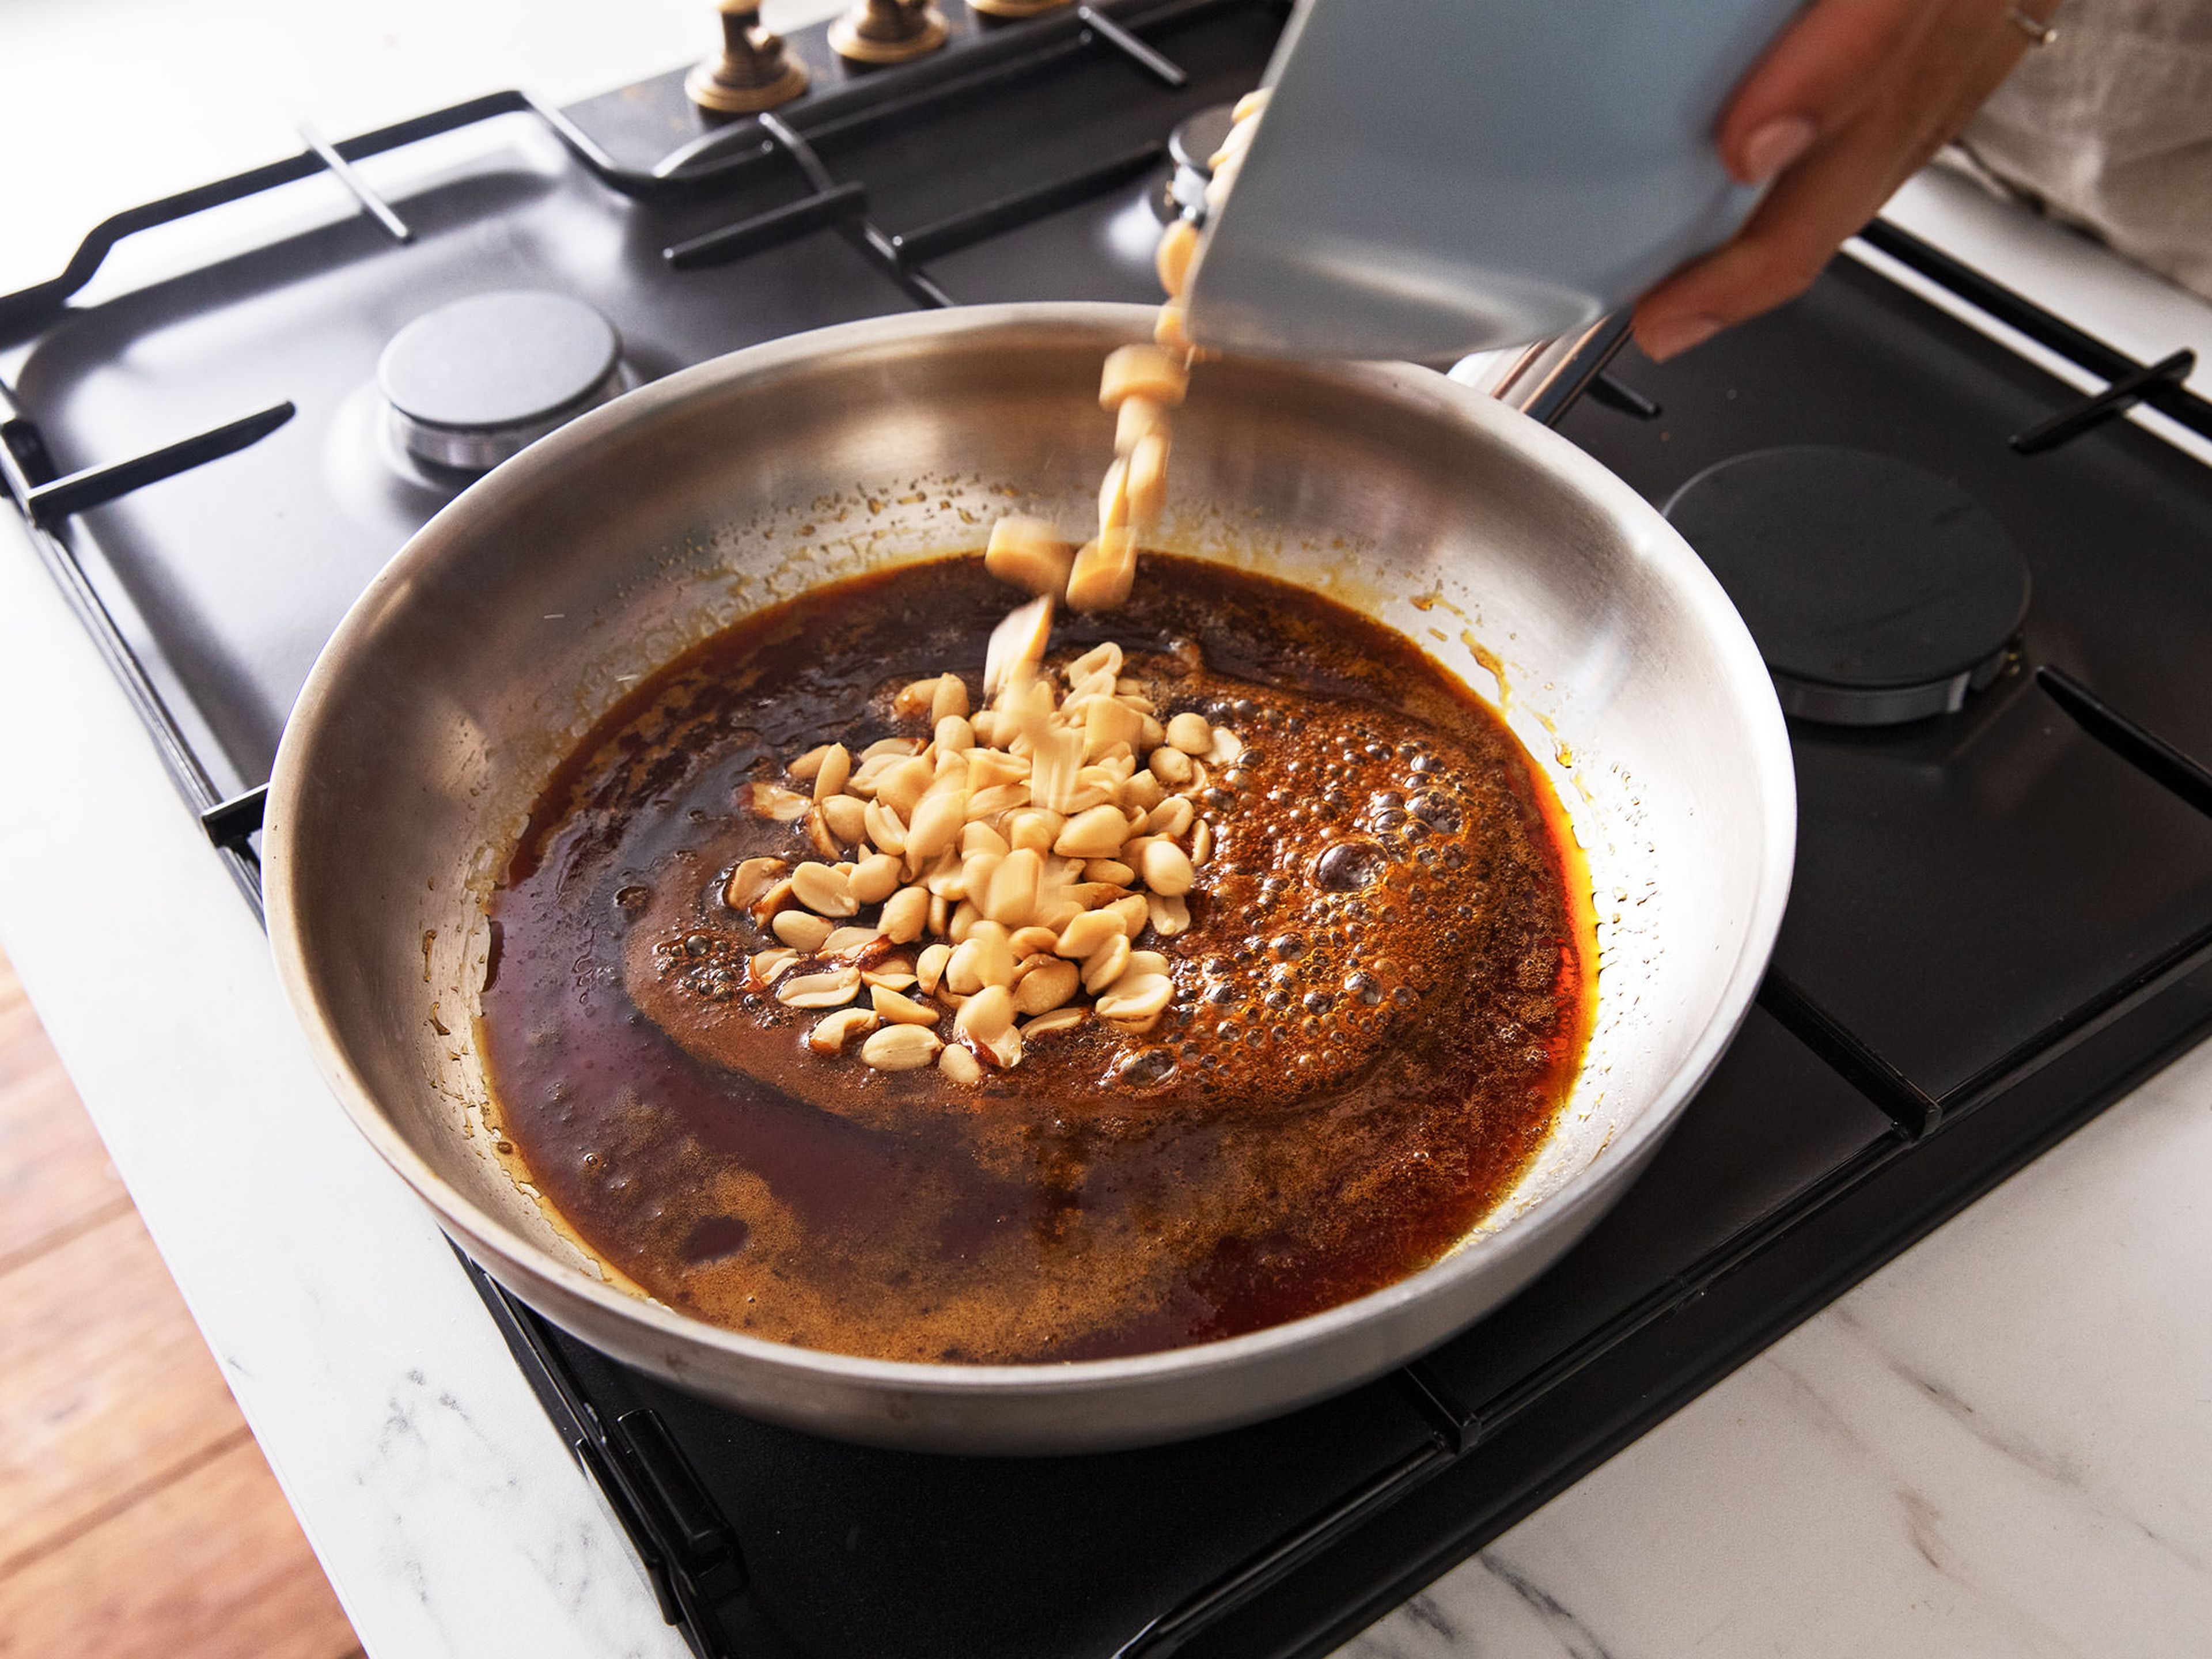 Put the sugar in a pan and caramelize over medium heat, do not stir but instead tilt the pan to melt it evenly. When the sugar is completely dissolved and amber in color, add the butter, peanuts, and salt and stir to combine.